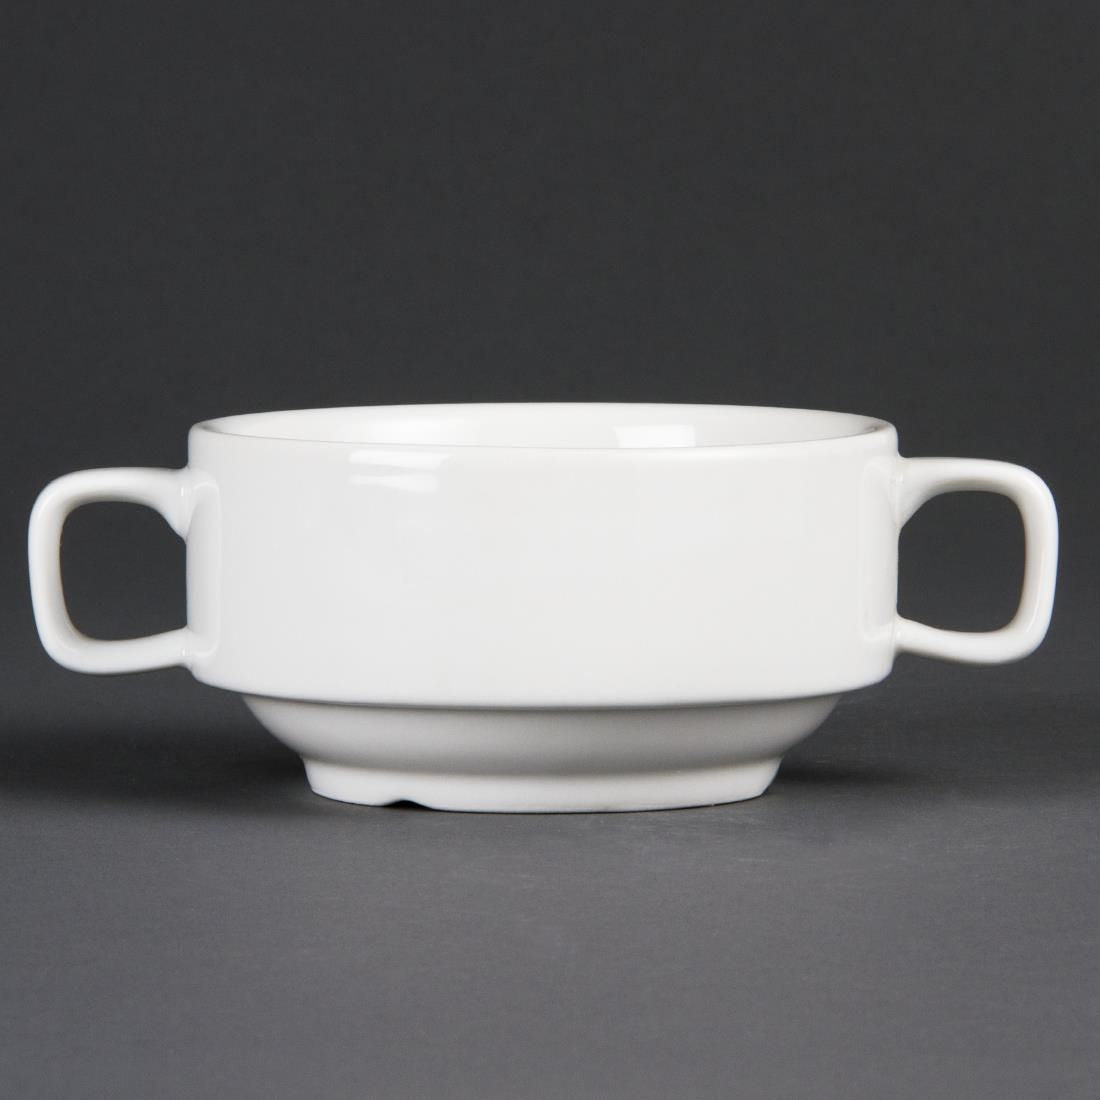 C239 Olympia Whiteware Soup Bowls With Handles 400ml (Pack of 6)